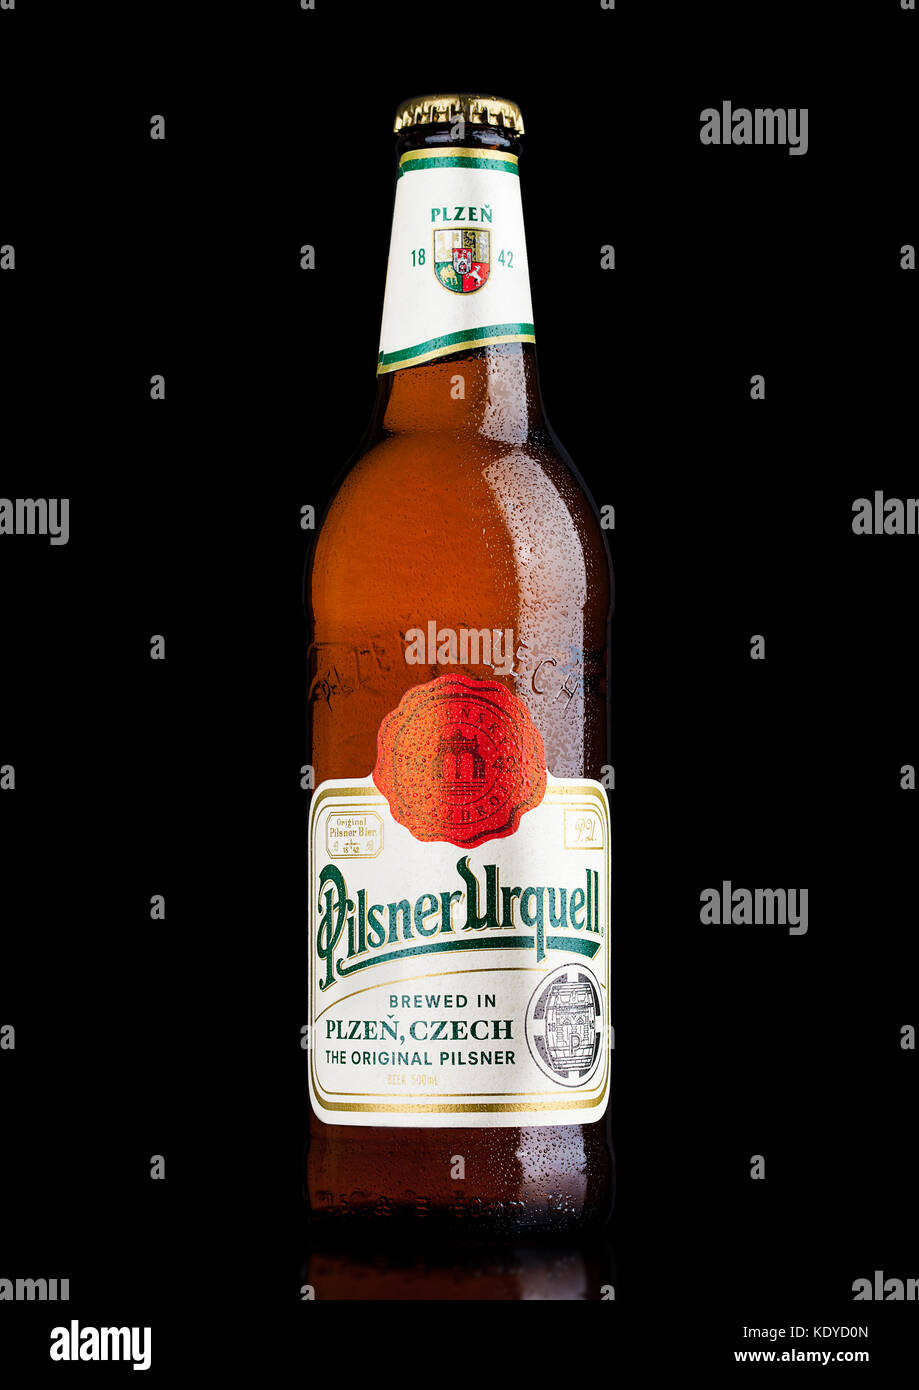 LONDON,UK - MARCH 21, 2017 :  Bottle of Pilsner Urquell beer on black background.It has been produced since 1842 in Pilsen, Czech Republic. Stock Photo